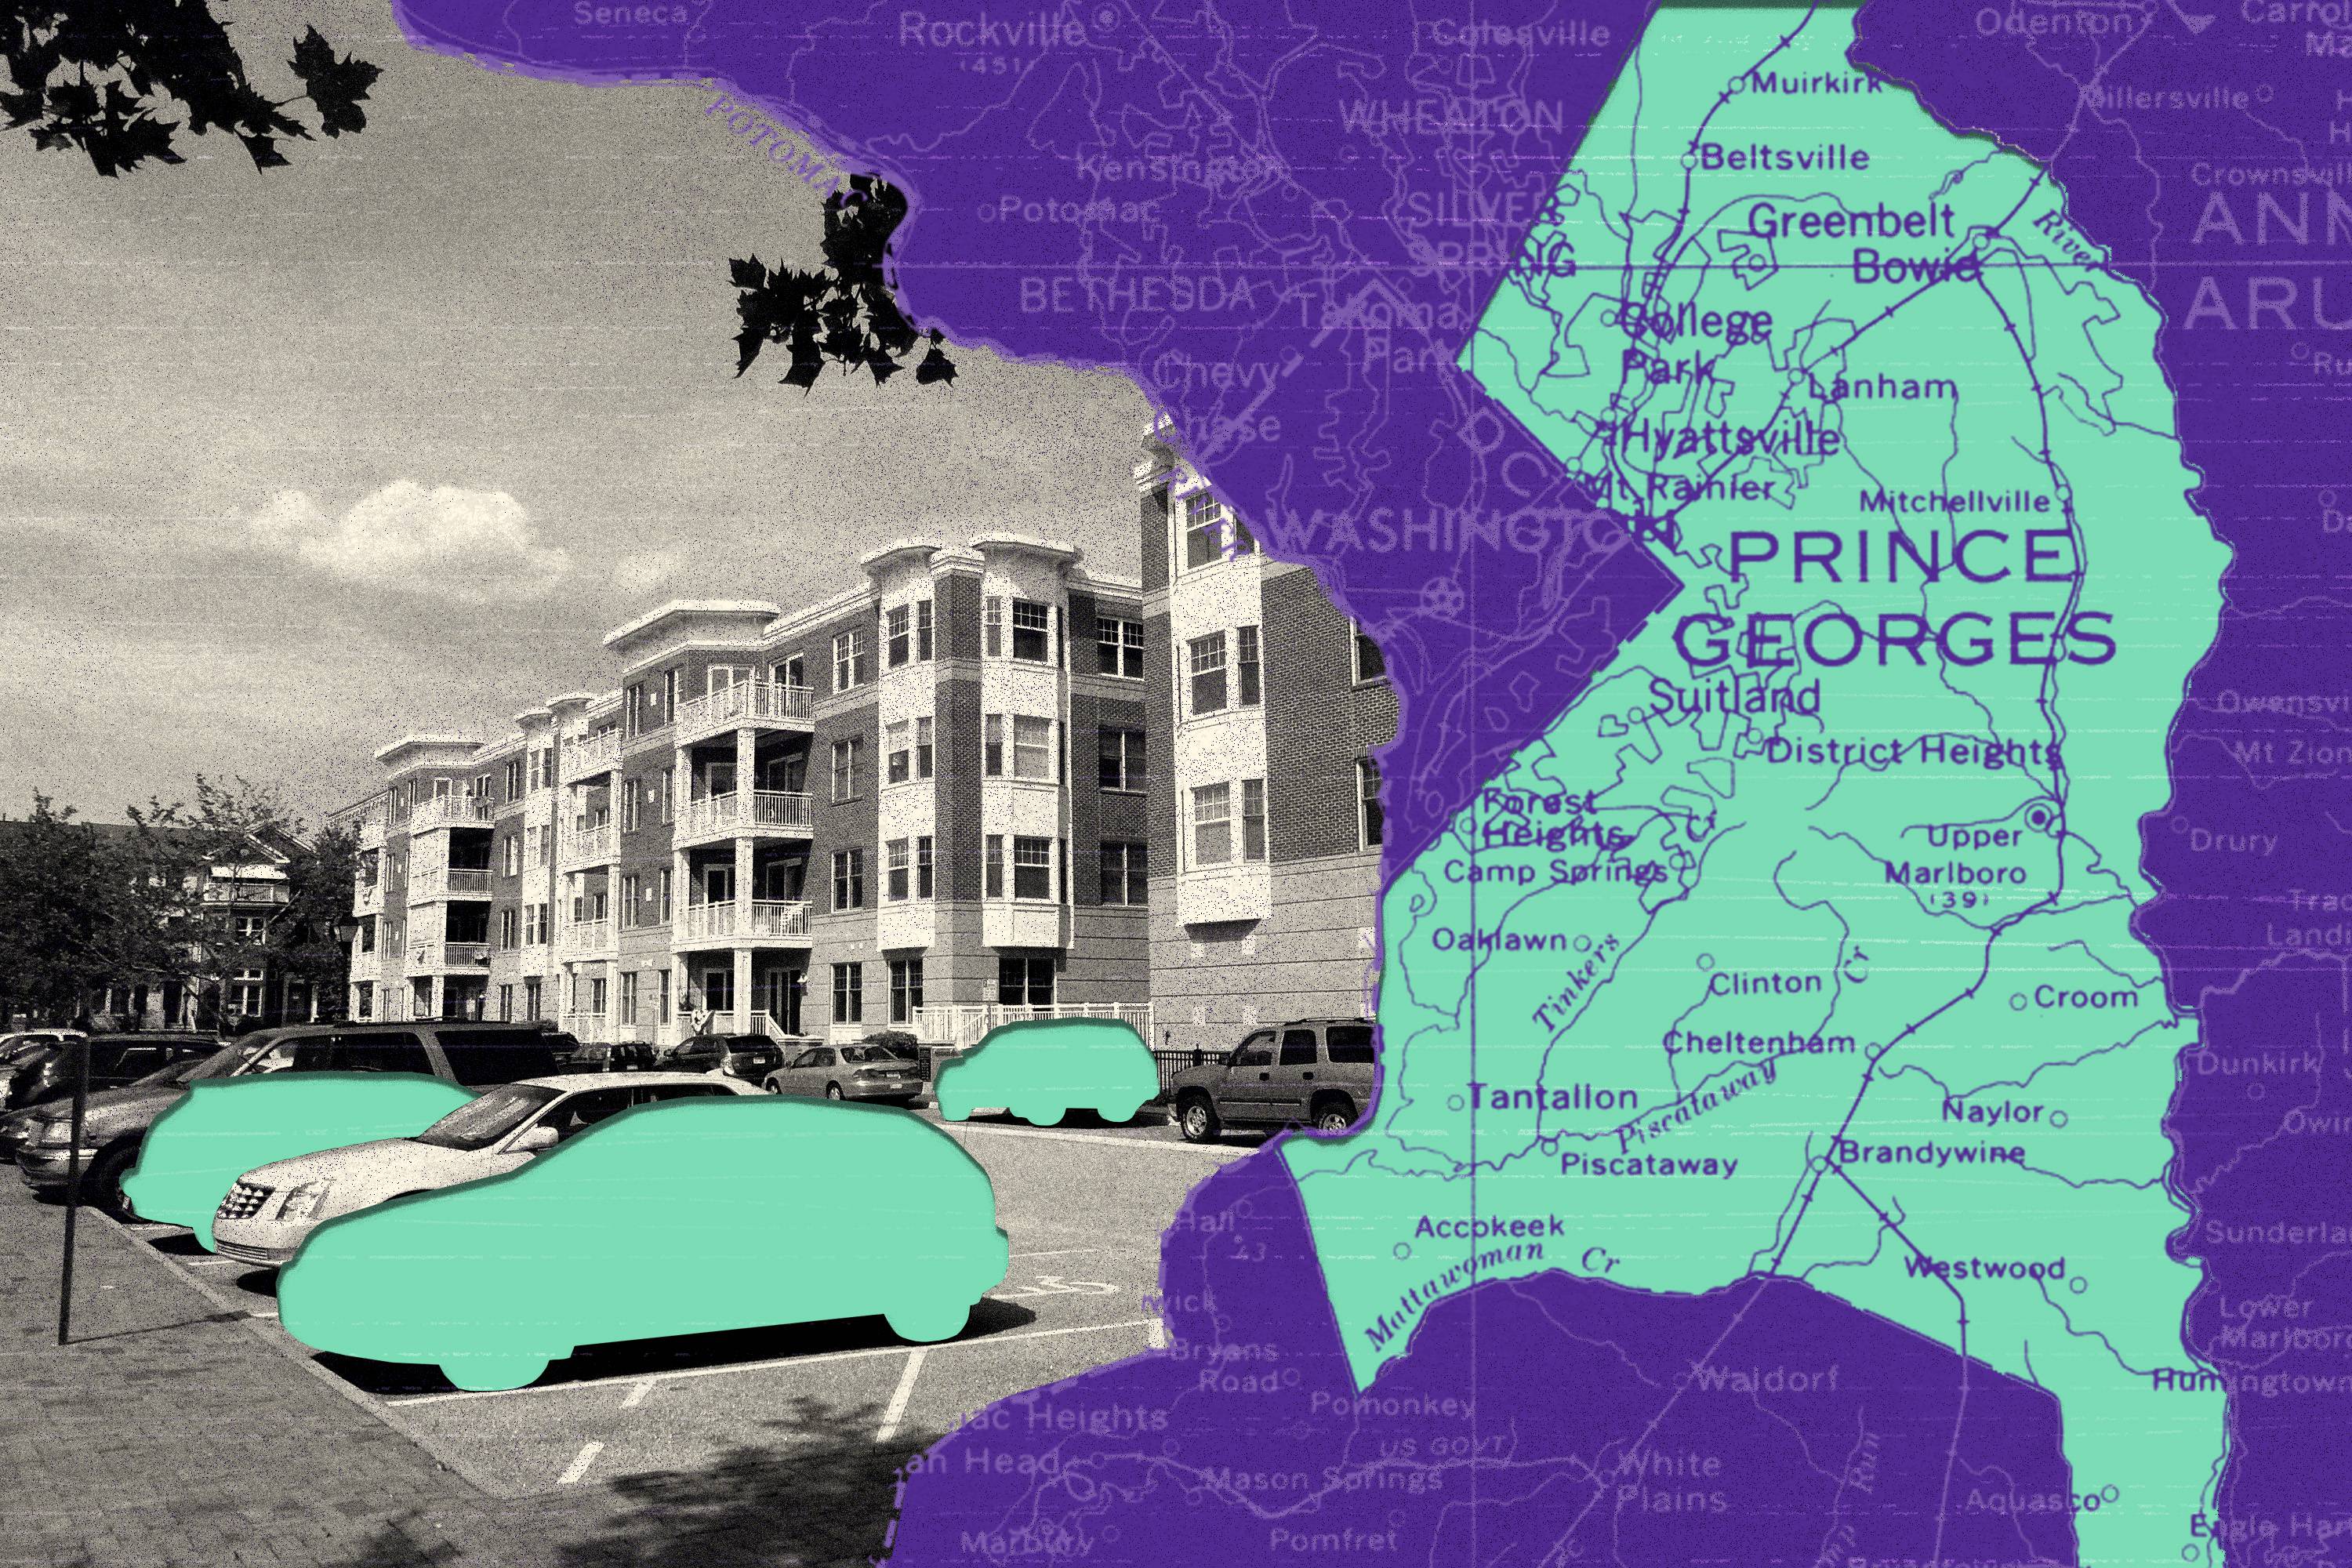 Photo illustration shows, on left, photo of parking lot with apartment condominiums in the background, with three cars cut out of image, showing a teal background. On the right is a dark purple map of Maryland and the District of Columbia with teal behind Prince Georges County.